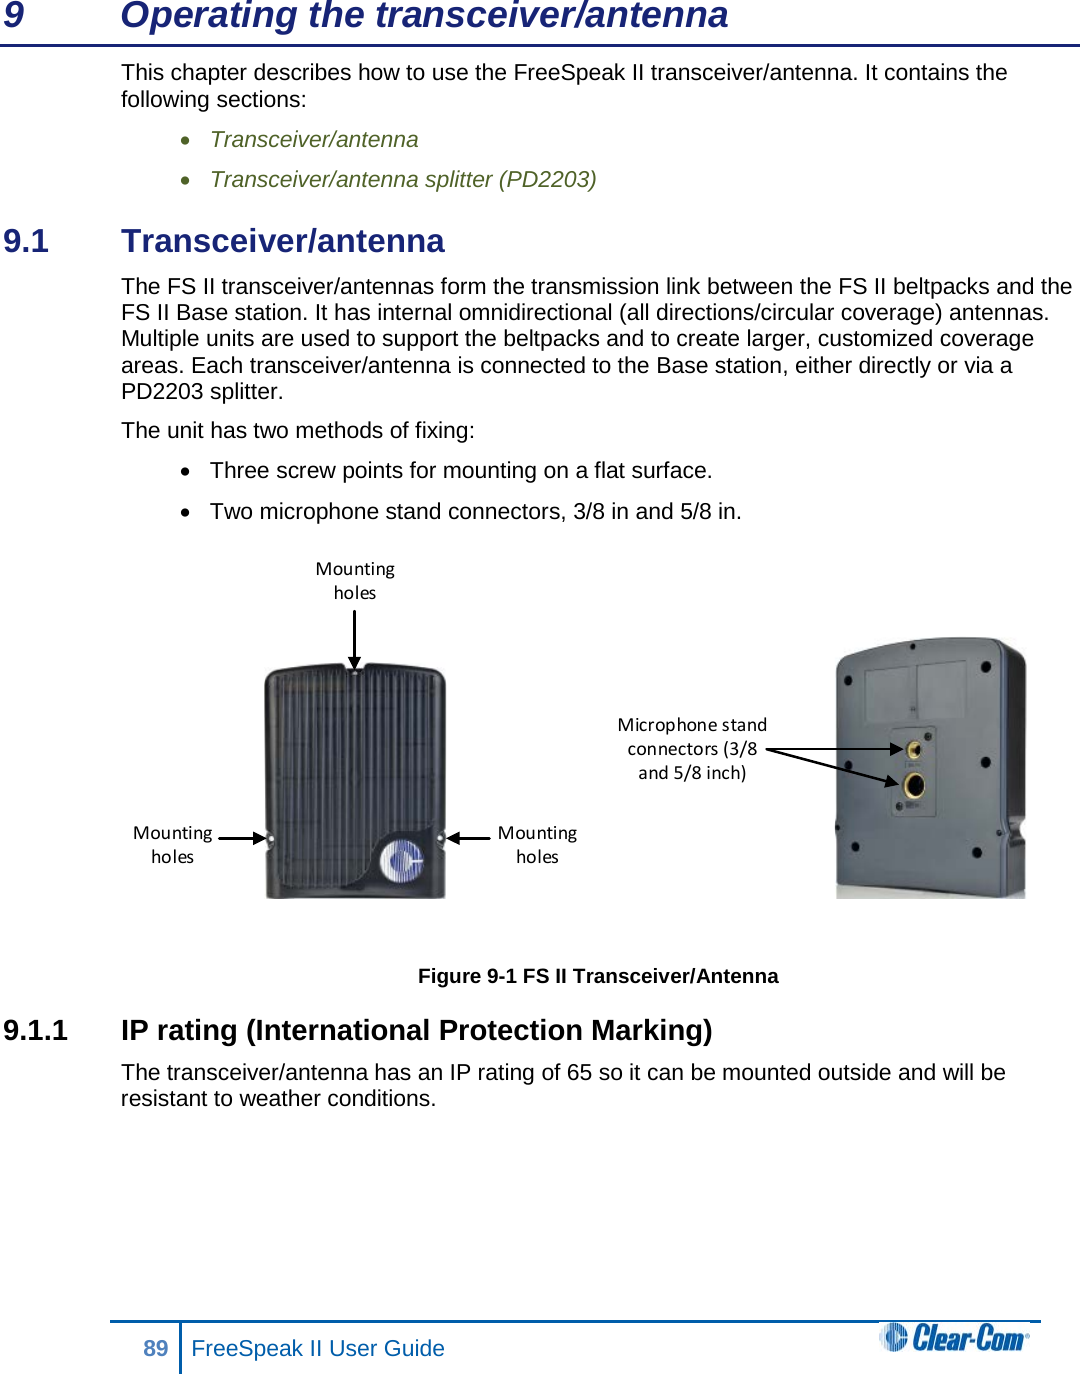 9  Operating the transceiver/antenna This chapter describes how to use the FreeSpeak II transceiver/antenna. It contains the following sections: • Transceiver/antenna • Transceiver/antenna splitter (PD2203) 9.1  Transceiver/antenna The FS II transceiver/antennas form the transmission link between the FS II beltpacks and the FS II Base station. It has internal omnidirectional (all directions/circular coverage) antennas. Multiple units are used to support the beltpacks and to create larger, customized coverage areas. Each transceiver/antenna is connected to the Base station, either directly or via a PD2203 splitter. The unit has two methods of fixing: • Three screw points for mounting on a flat surface. • Two microphone stand connectors, 3/8 in and 5/8 in.    Figure 9-1 FS II Transceiver/Antenna 9.1.1  IP rating (International Protection Marking) The transceiver/antenna has an IP rating of 65 so it can be mounted outside and will be resistant to weather conditions.  Mounting holesMounting holesMounting holesMicrophone stand connectors (3/8 and 5/8 inch)89 FreeSpeak II User Guide  